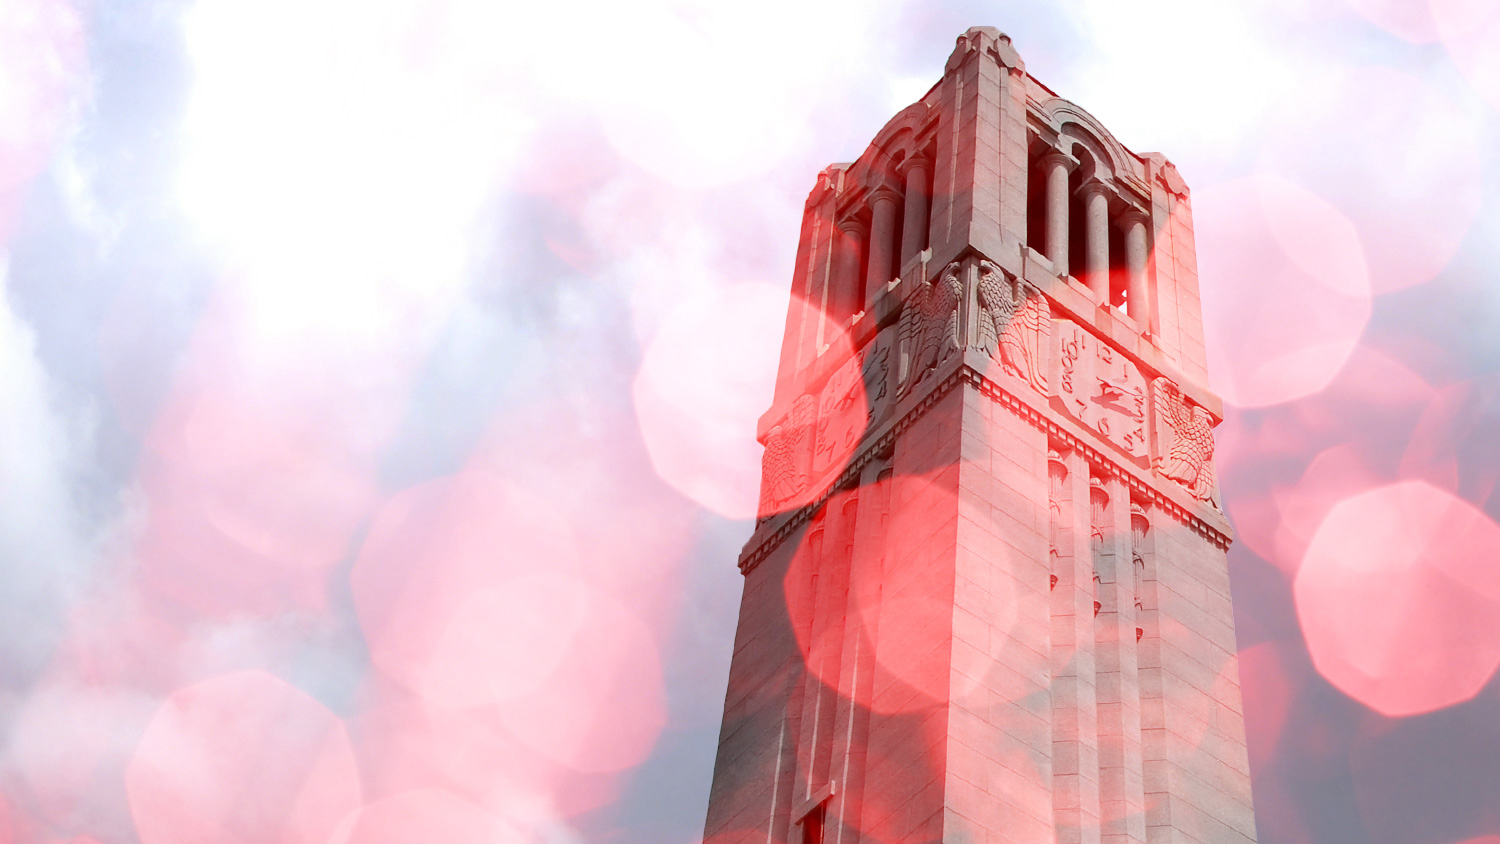 A stylized, rose-tinted shot of the NC State Memorial Bell Tower.